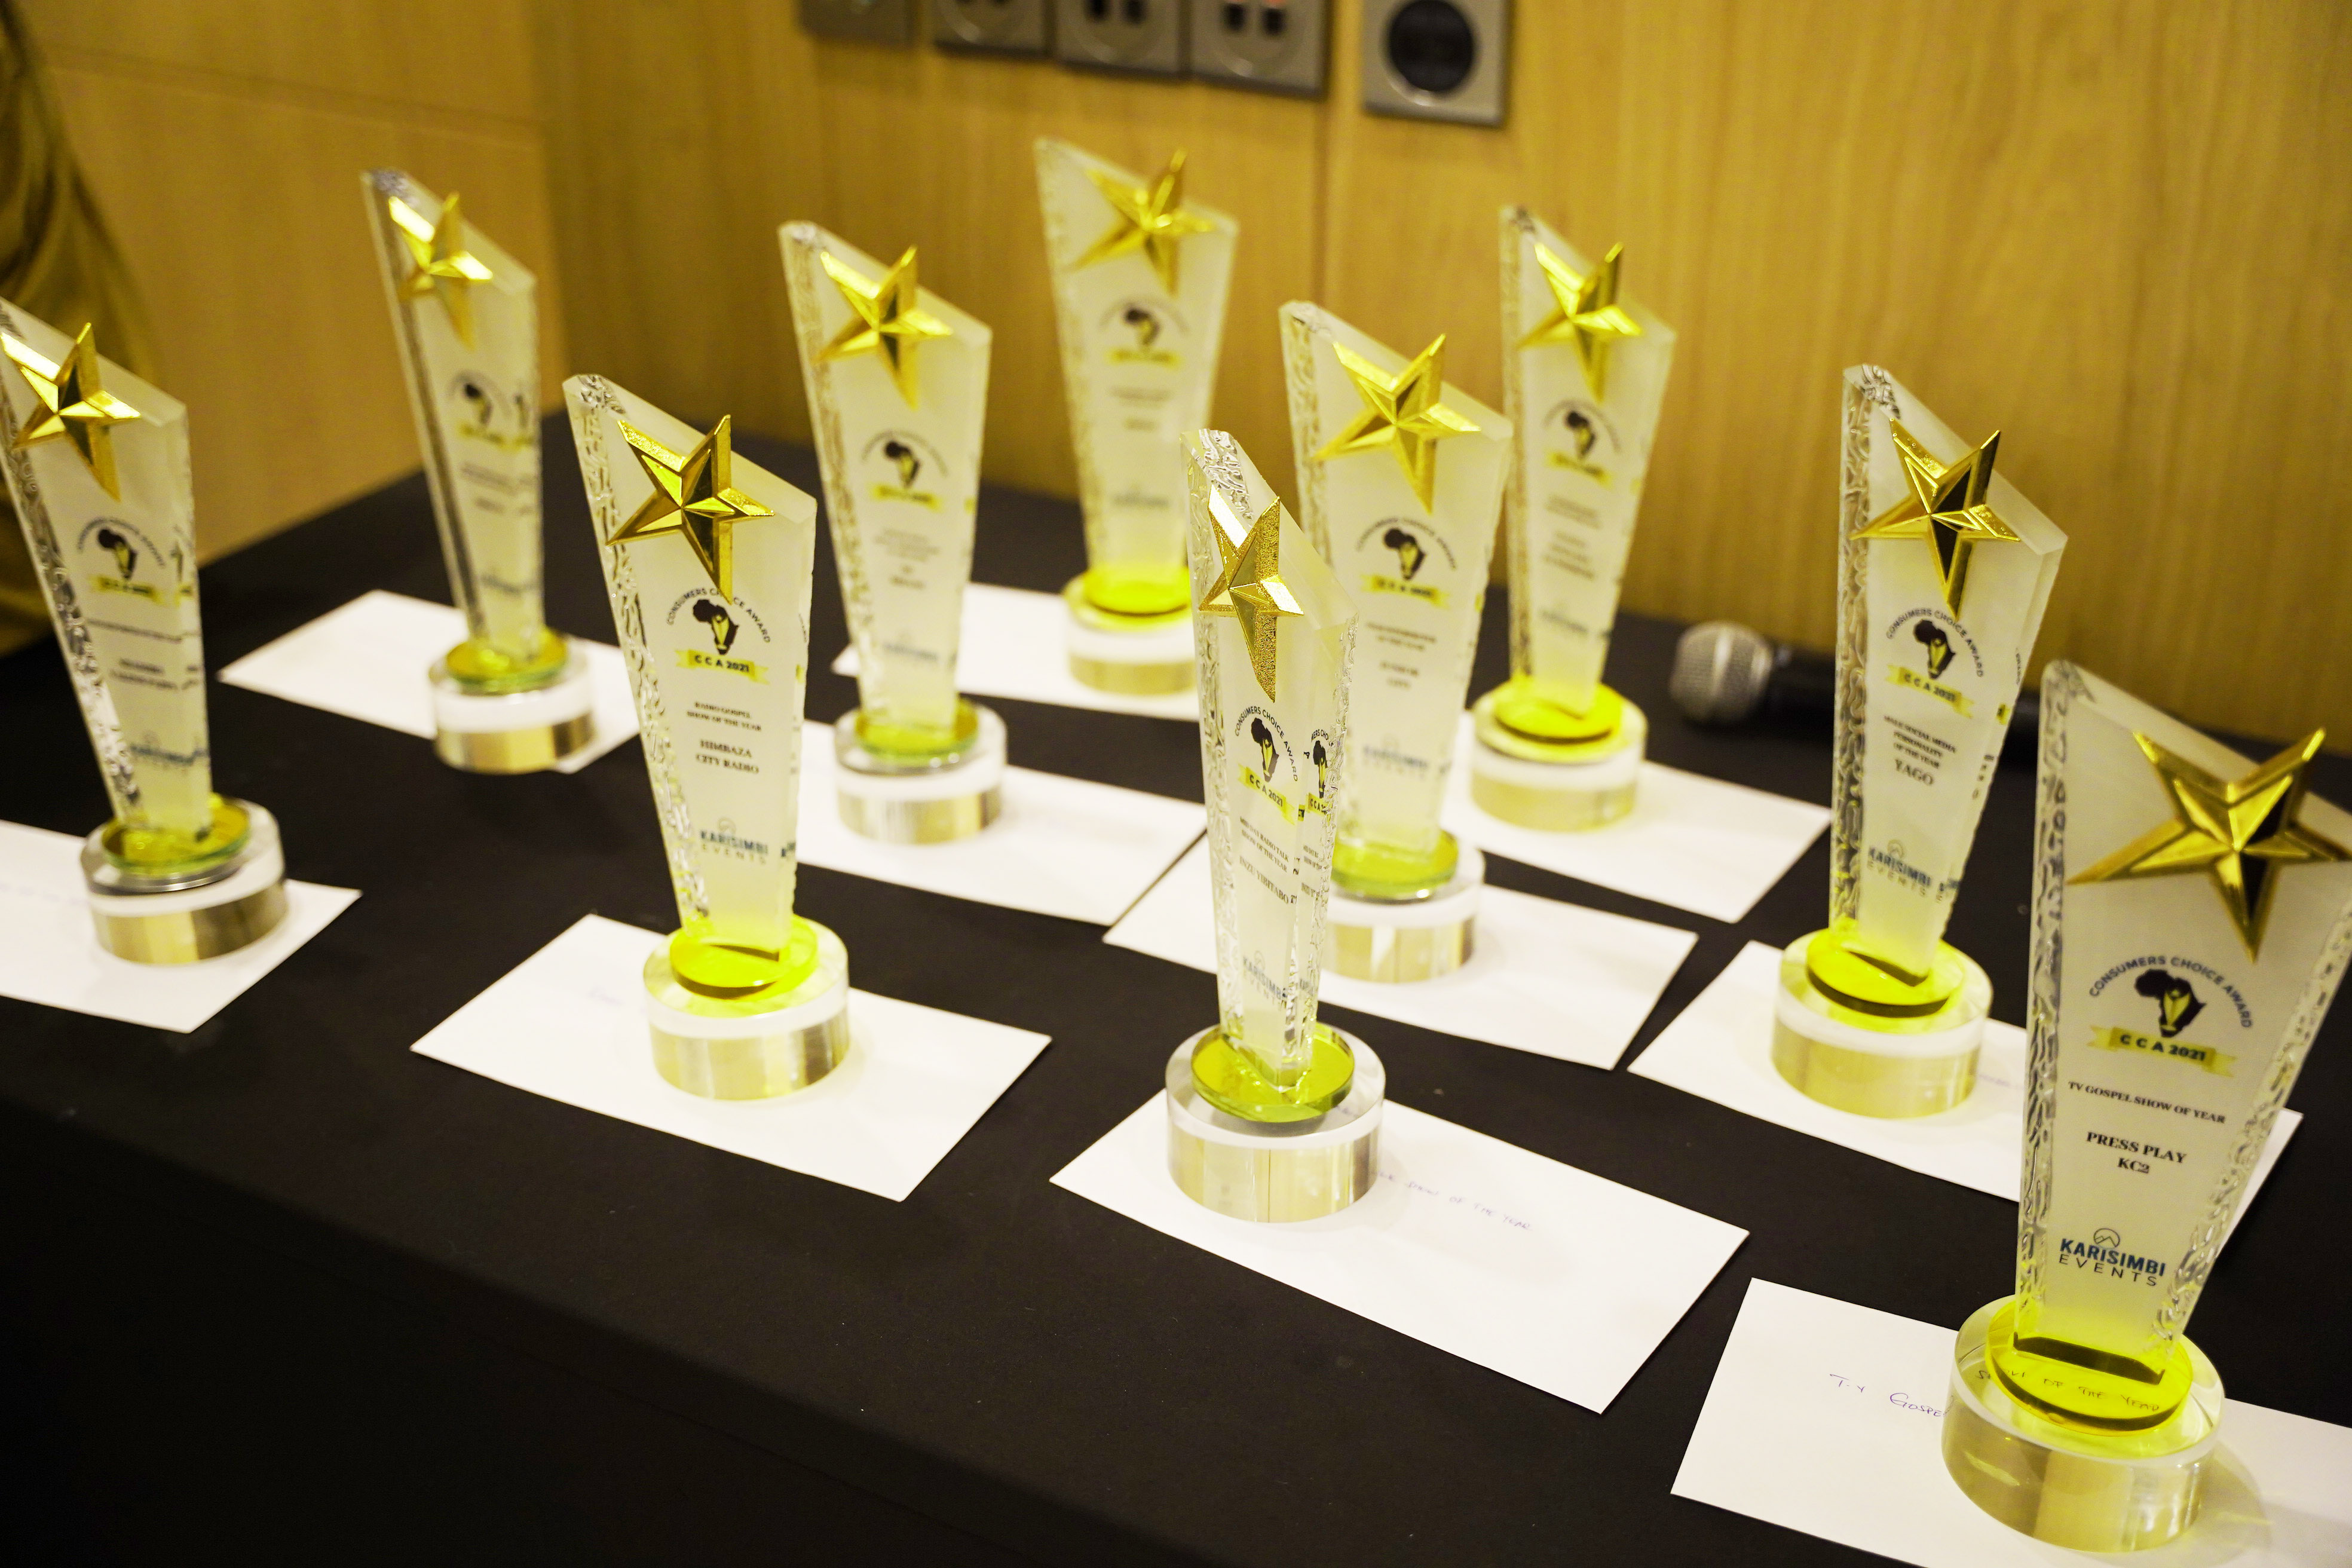 The Consumers Choice Awards organised by Karisimbi Events took place in Marriot Hotel, Kigali at a gala night on February 27.